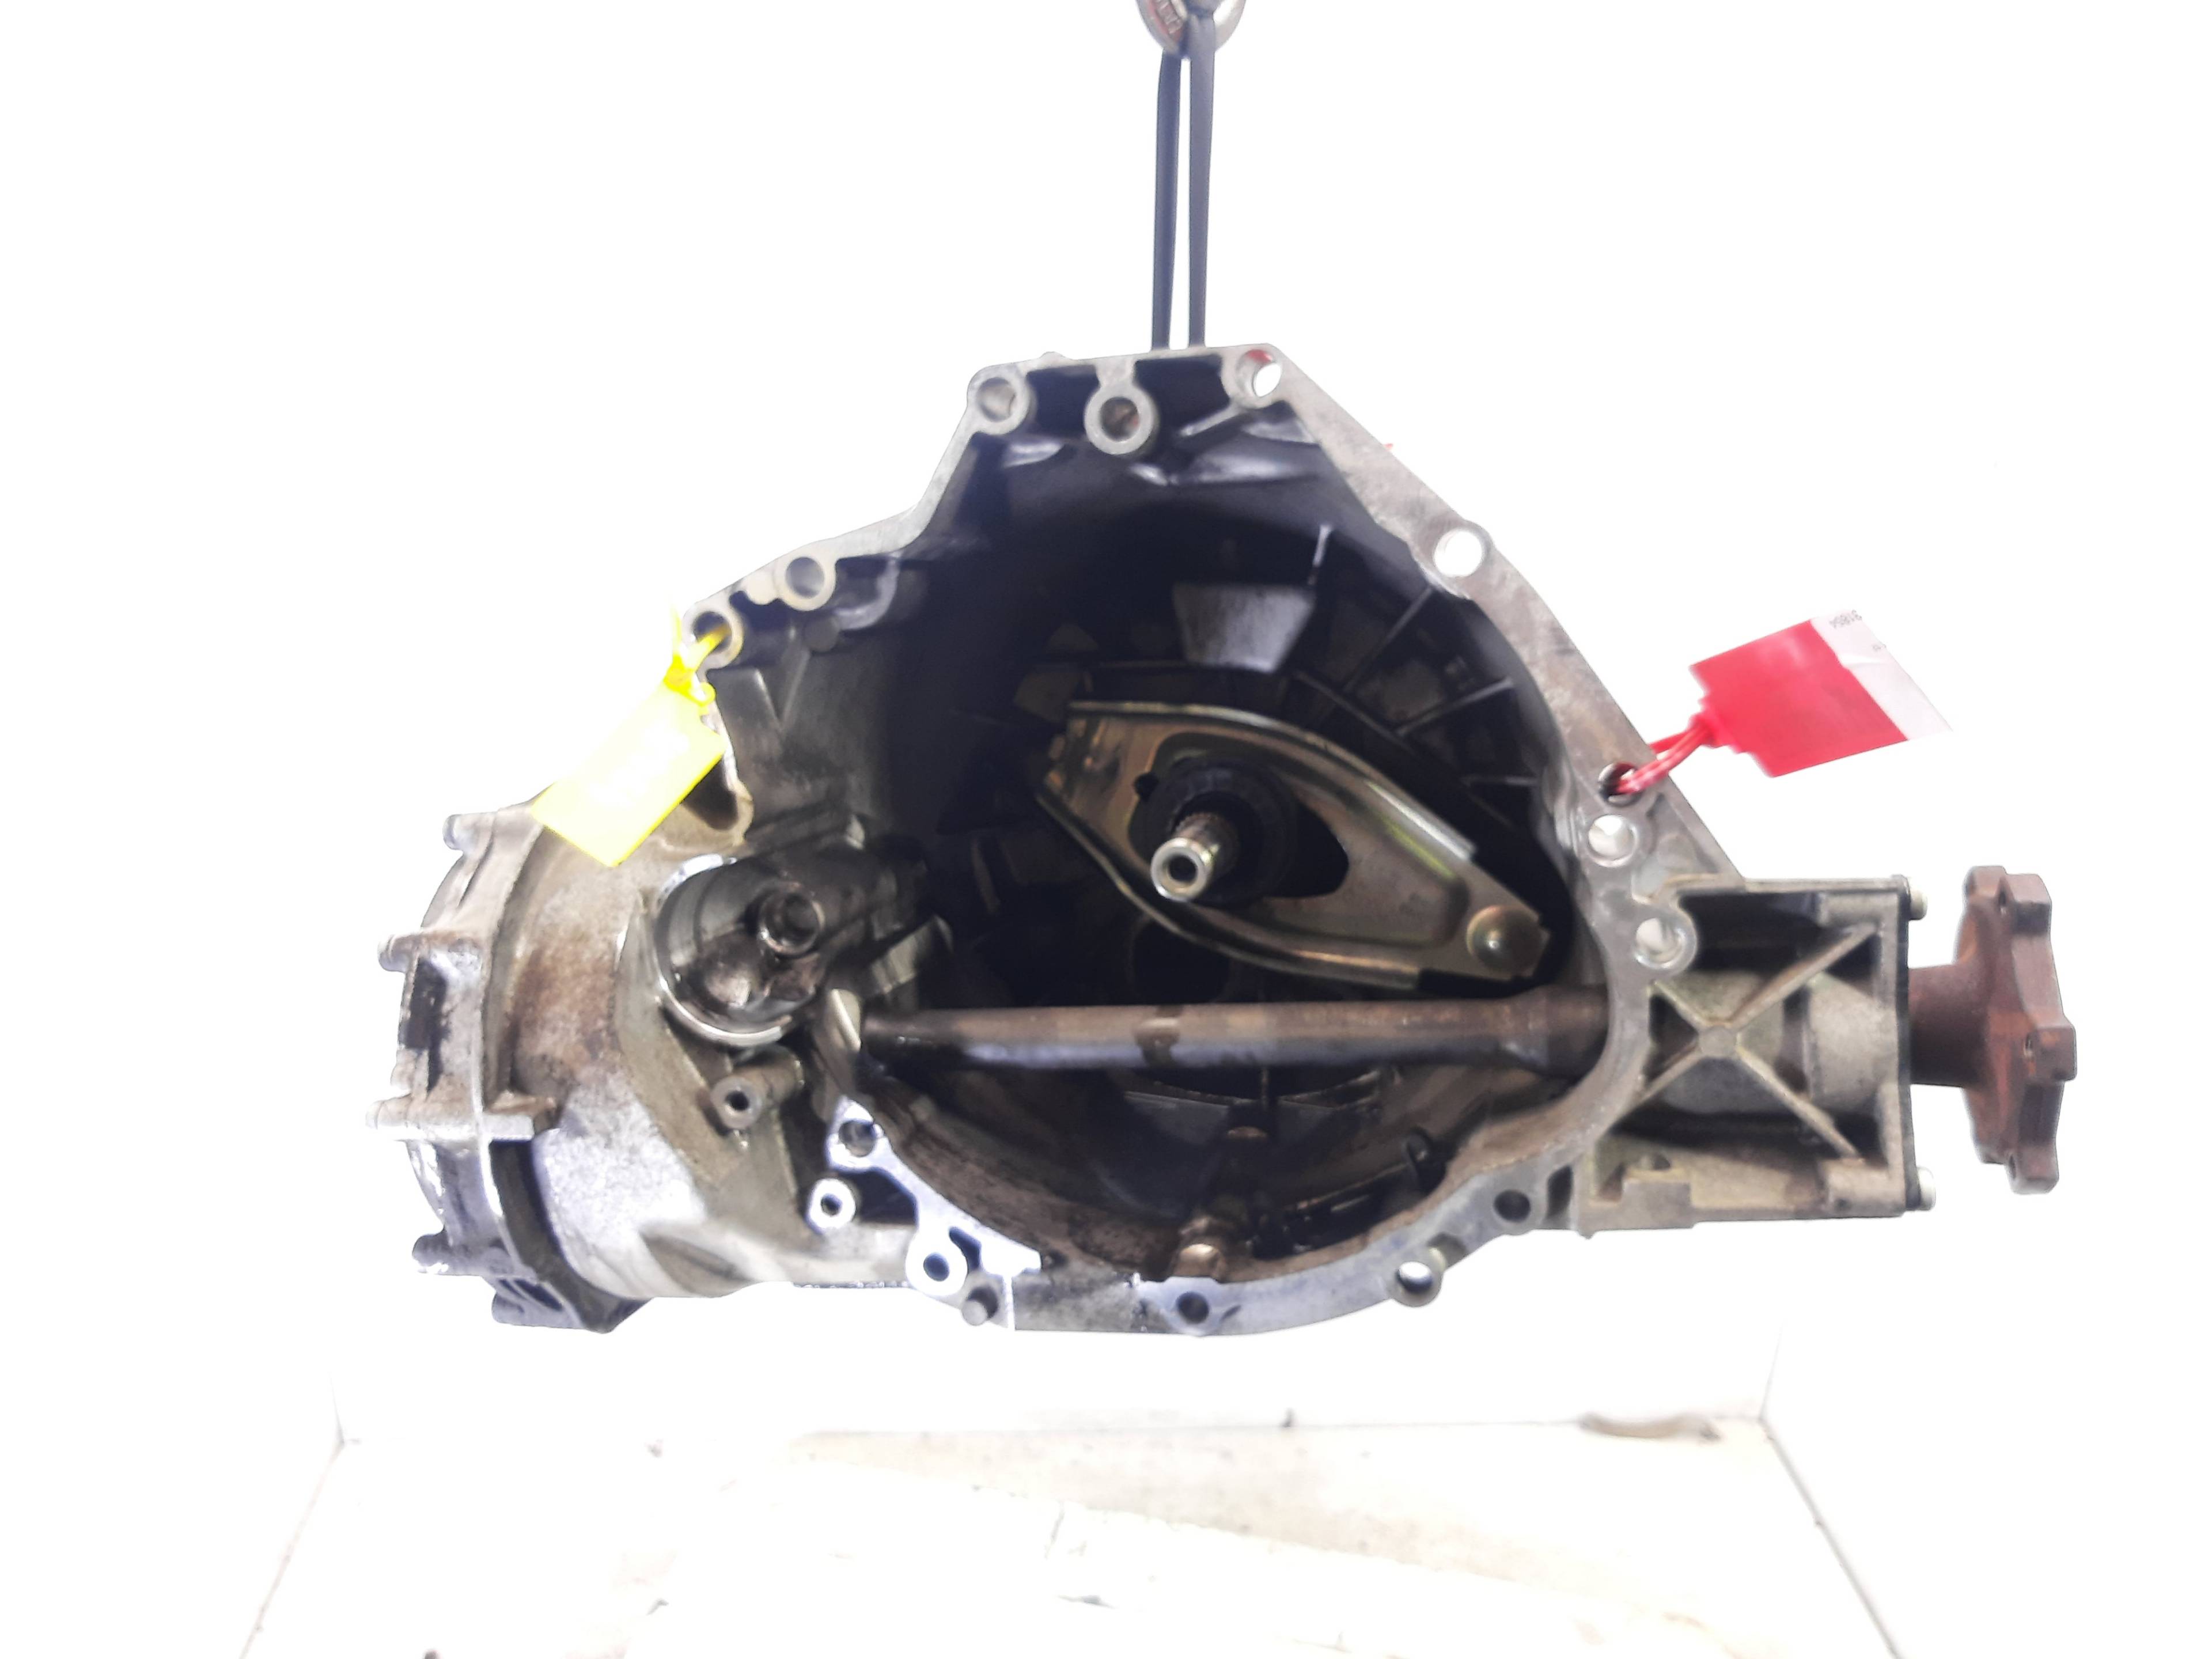 AUDI A5 8T (2007-2016) Gearbox LLV, 6VELOCIDADES 21335006